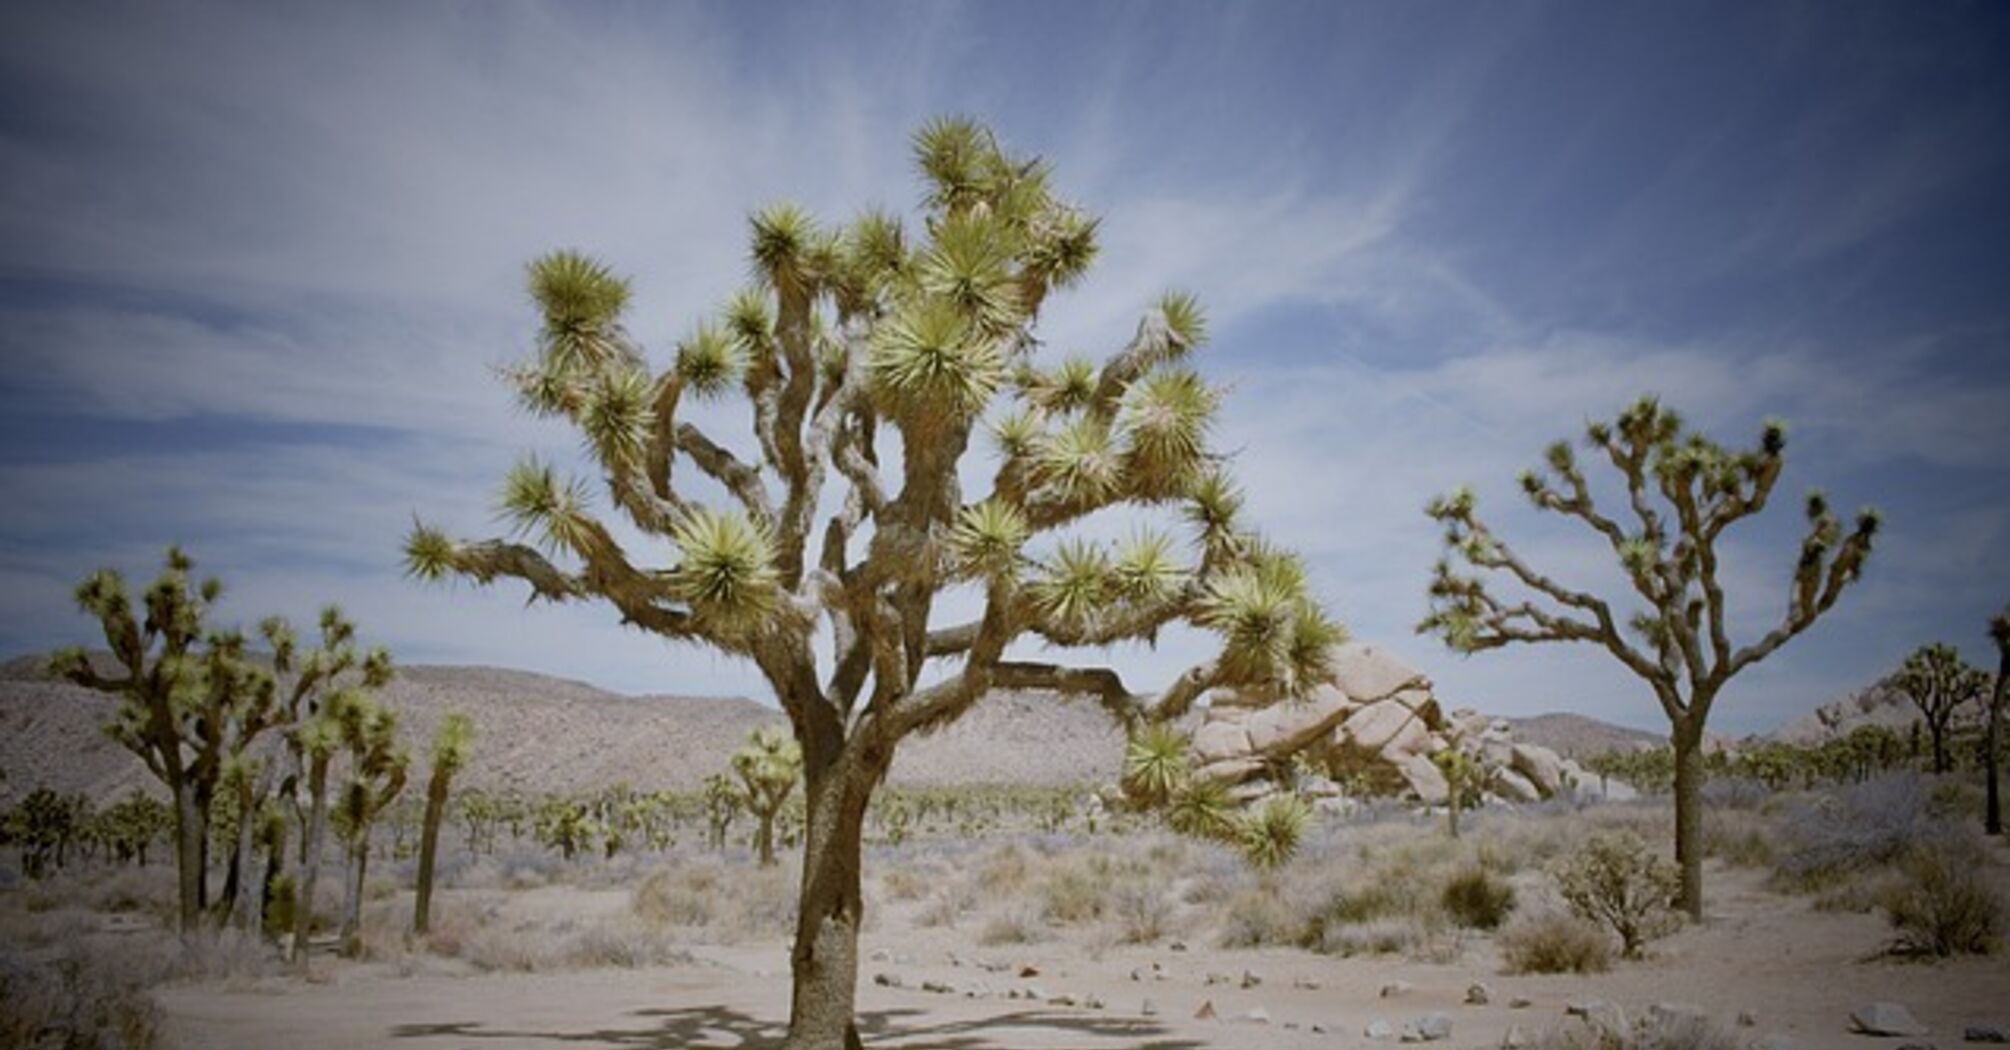 The best hotels in the heart of Joshua Tree